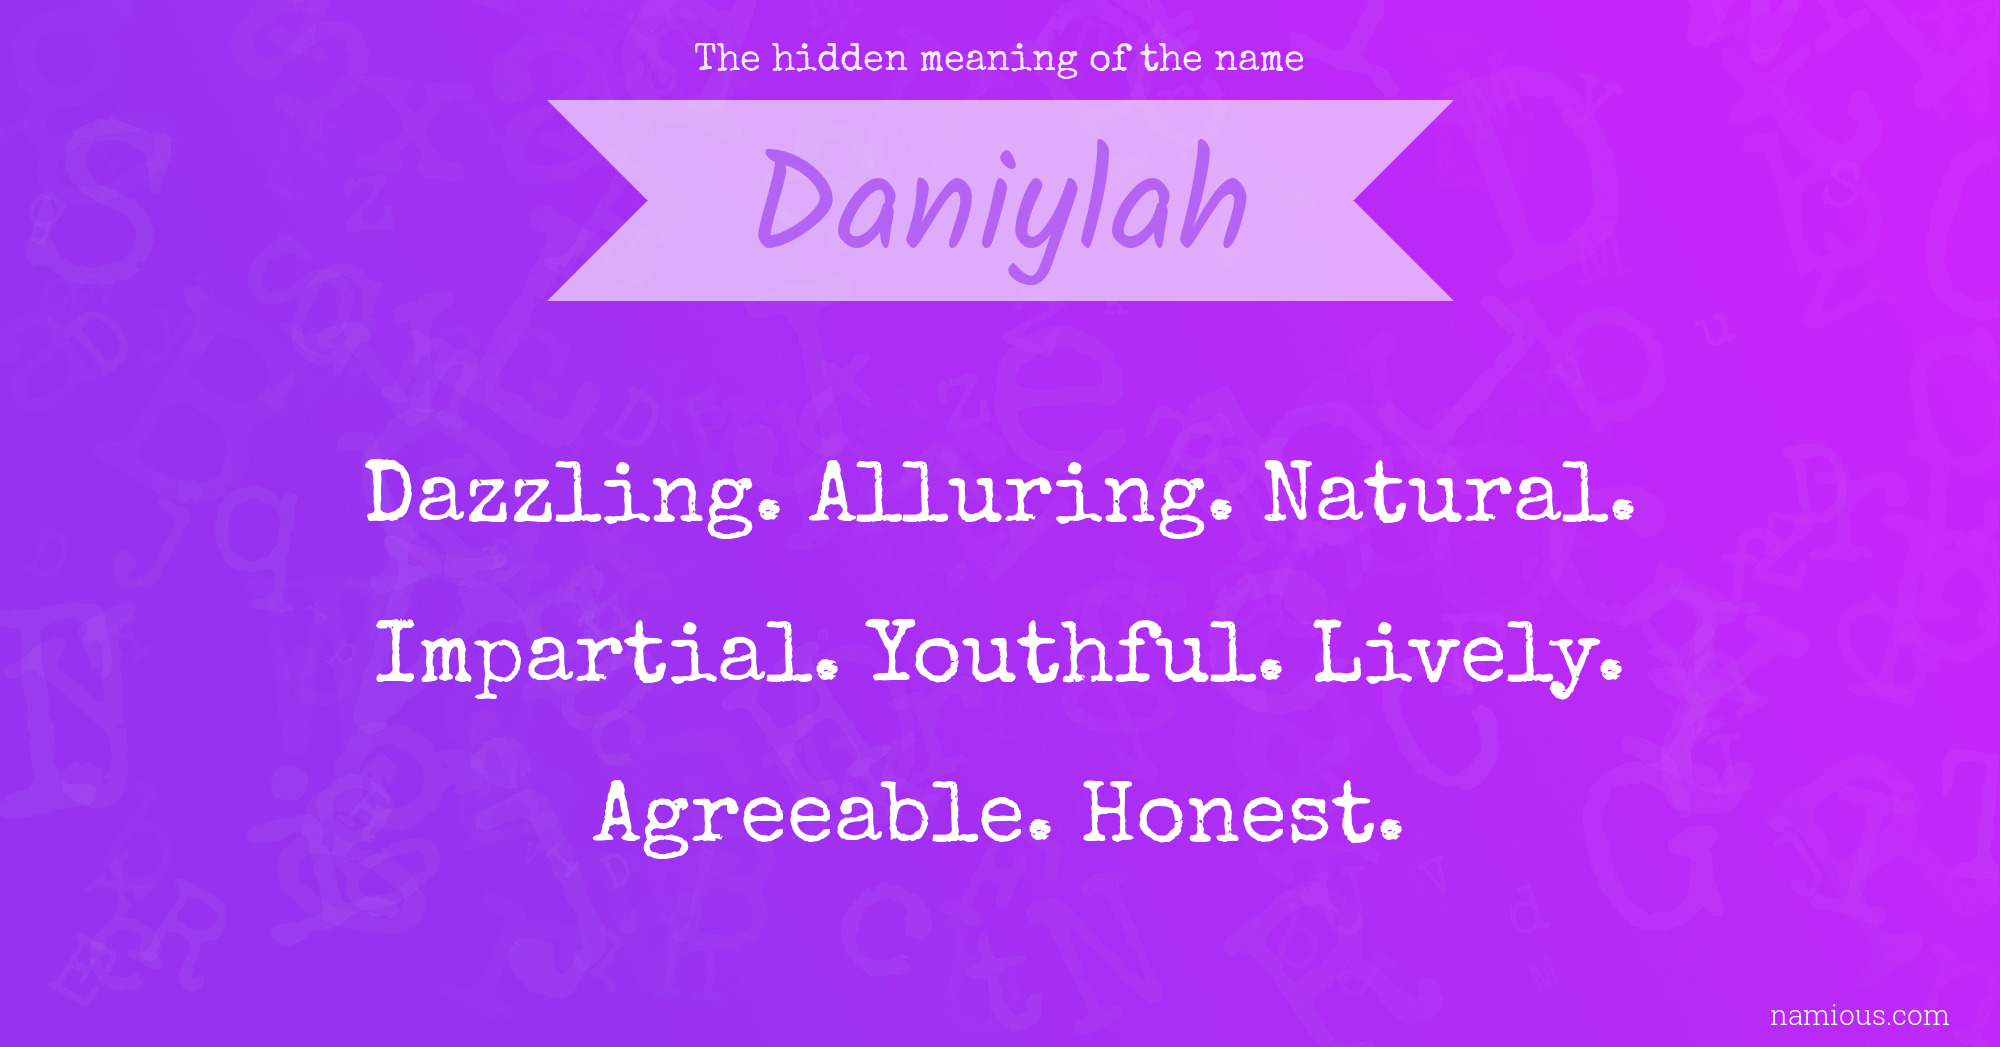 The hidden meaning of the name Daniylah